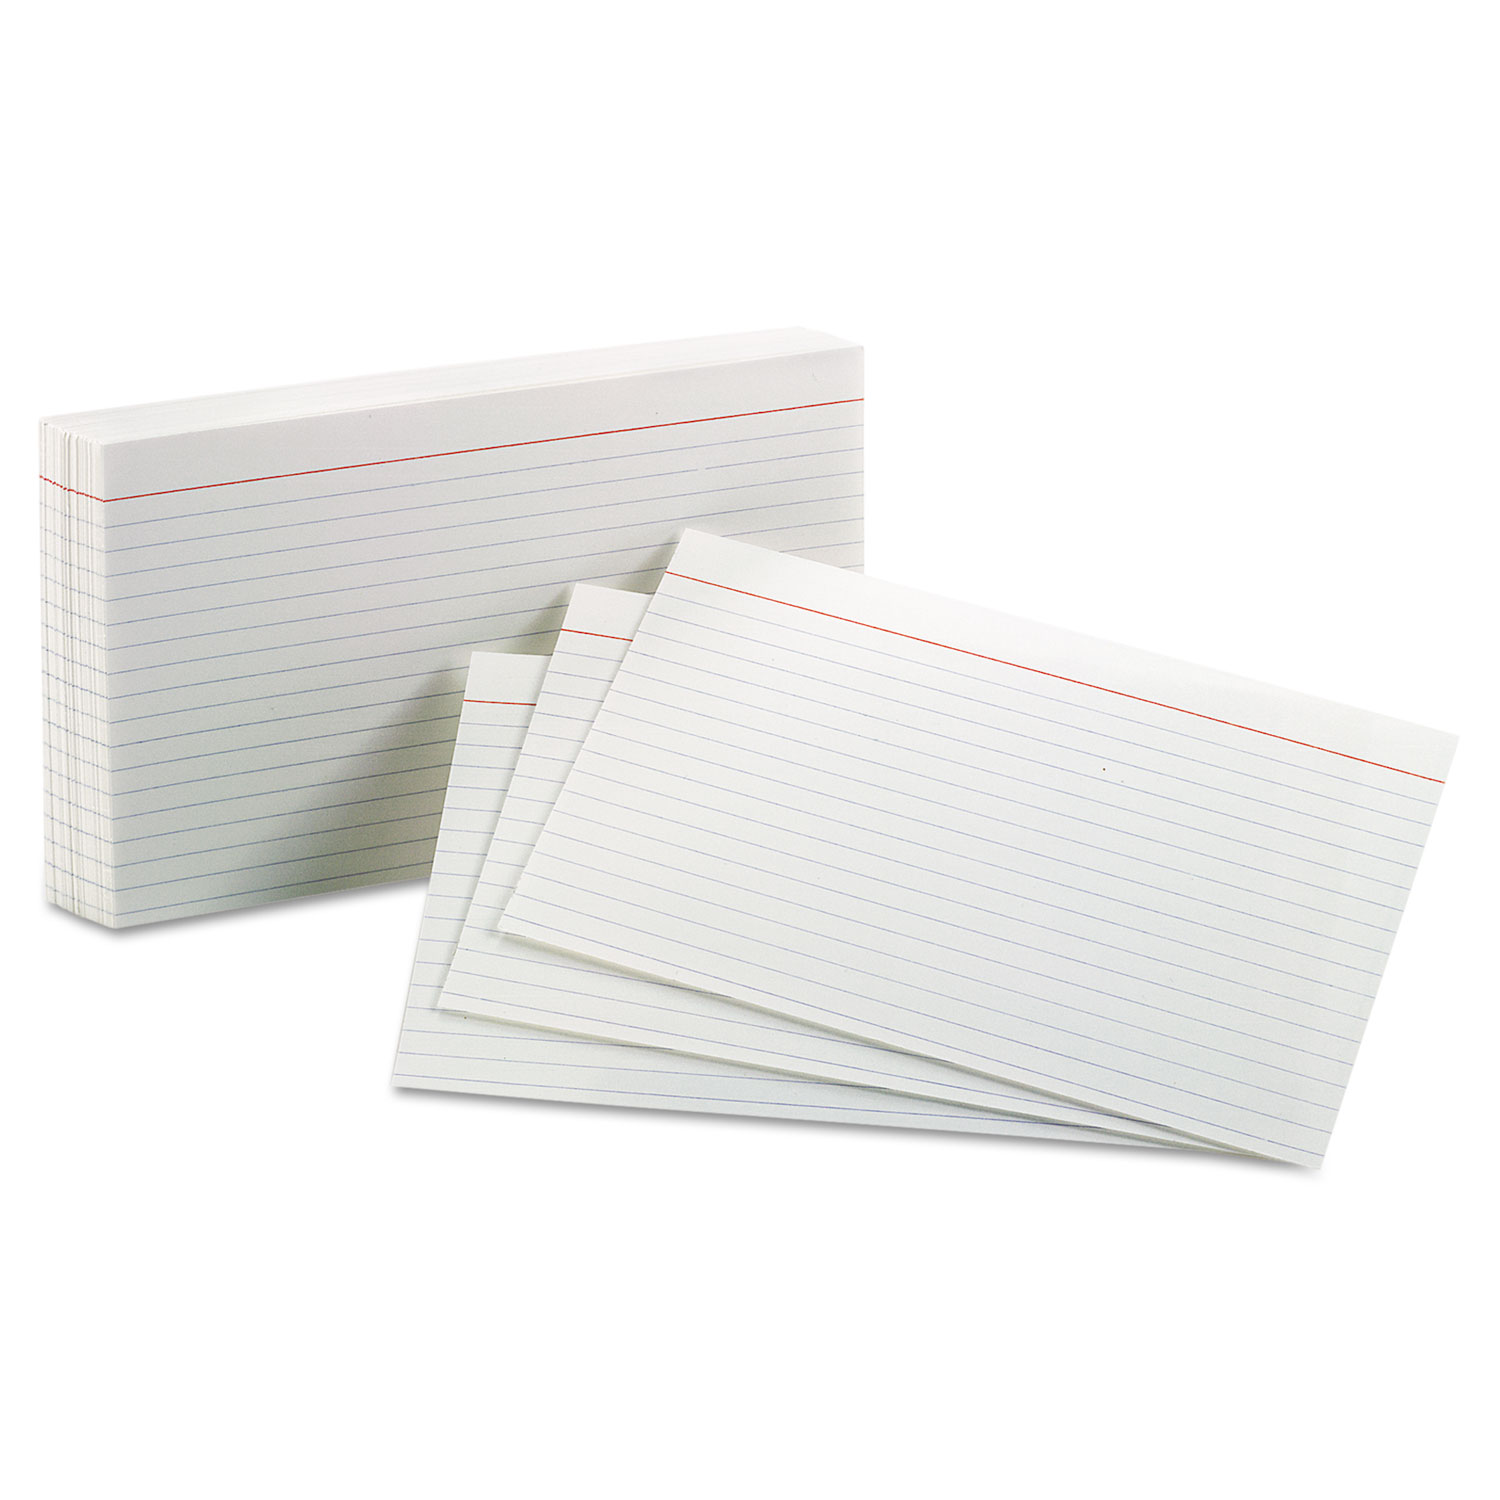 New Index Card Dividers Oxford Durable Poly A-Z Guides Colored 5x8